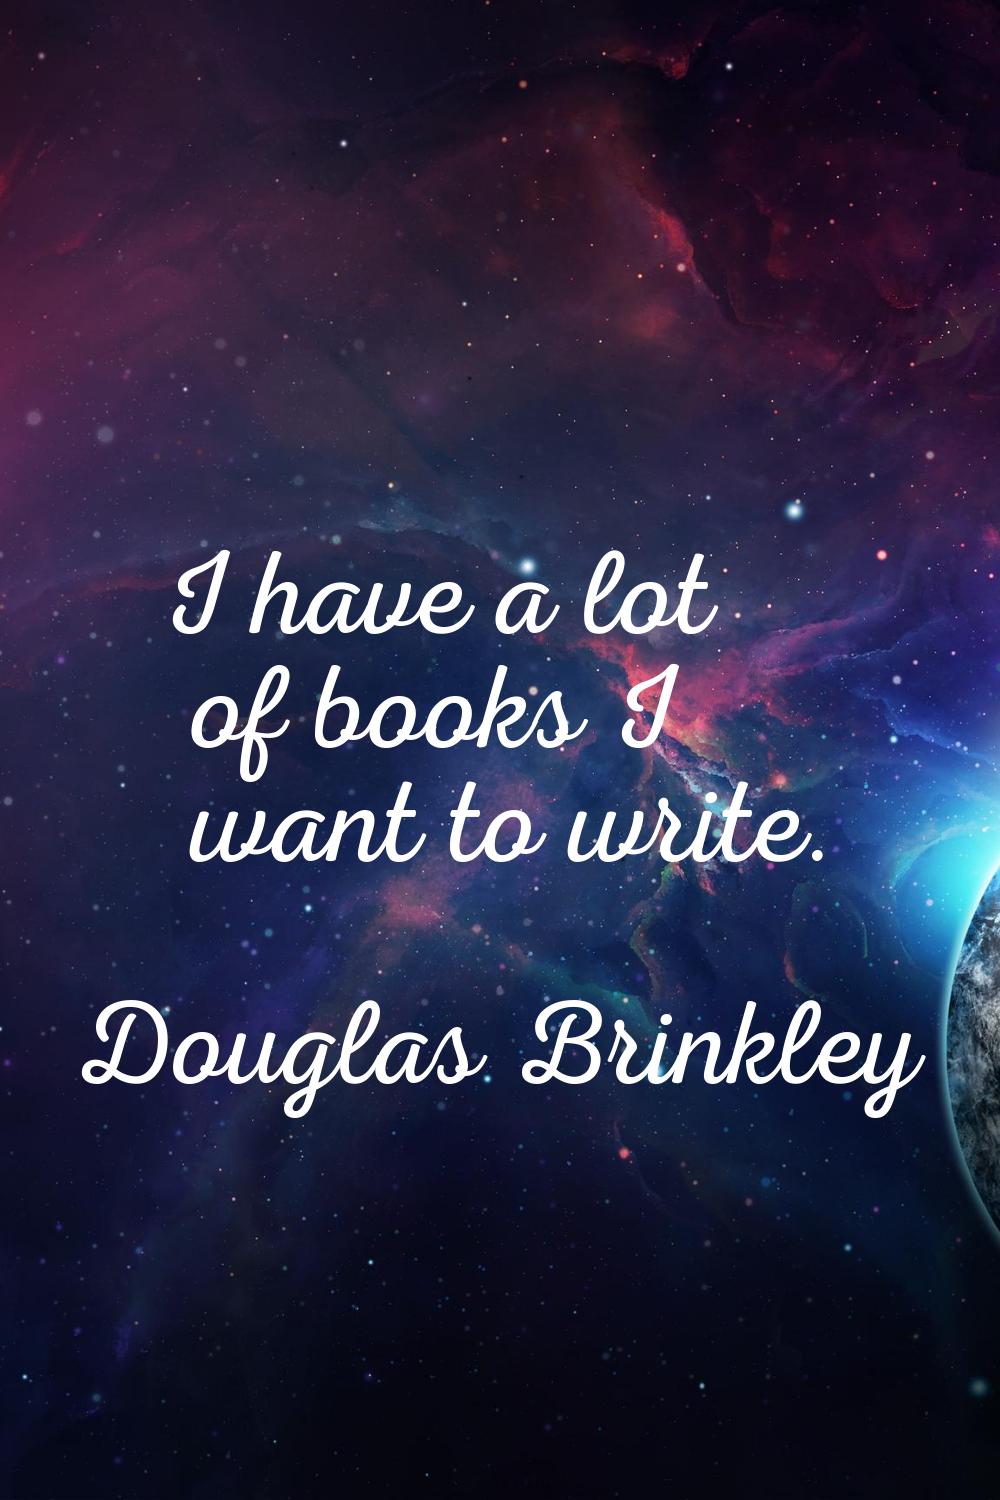 I have a lot of books I want to write.